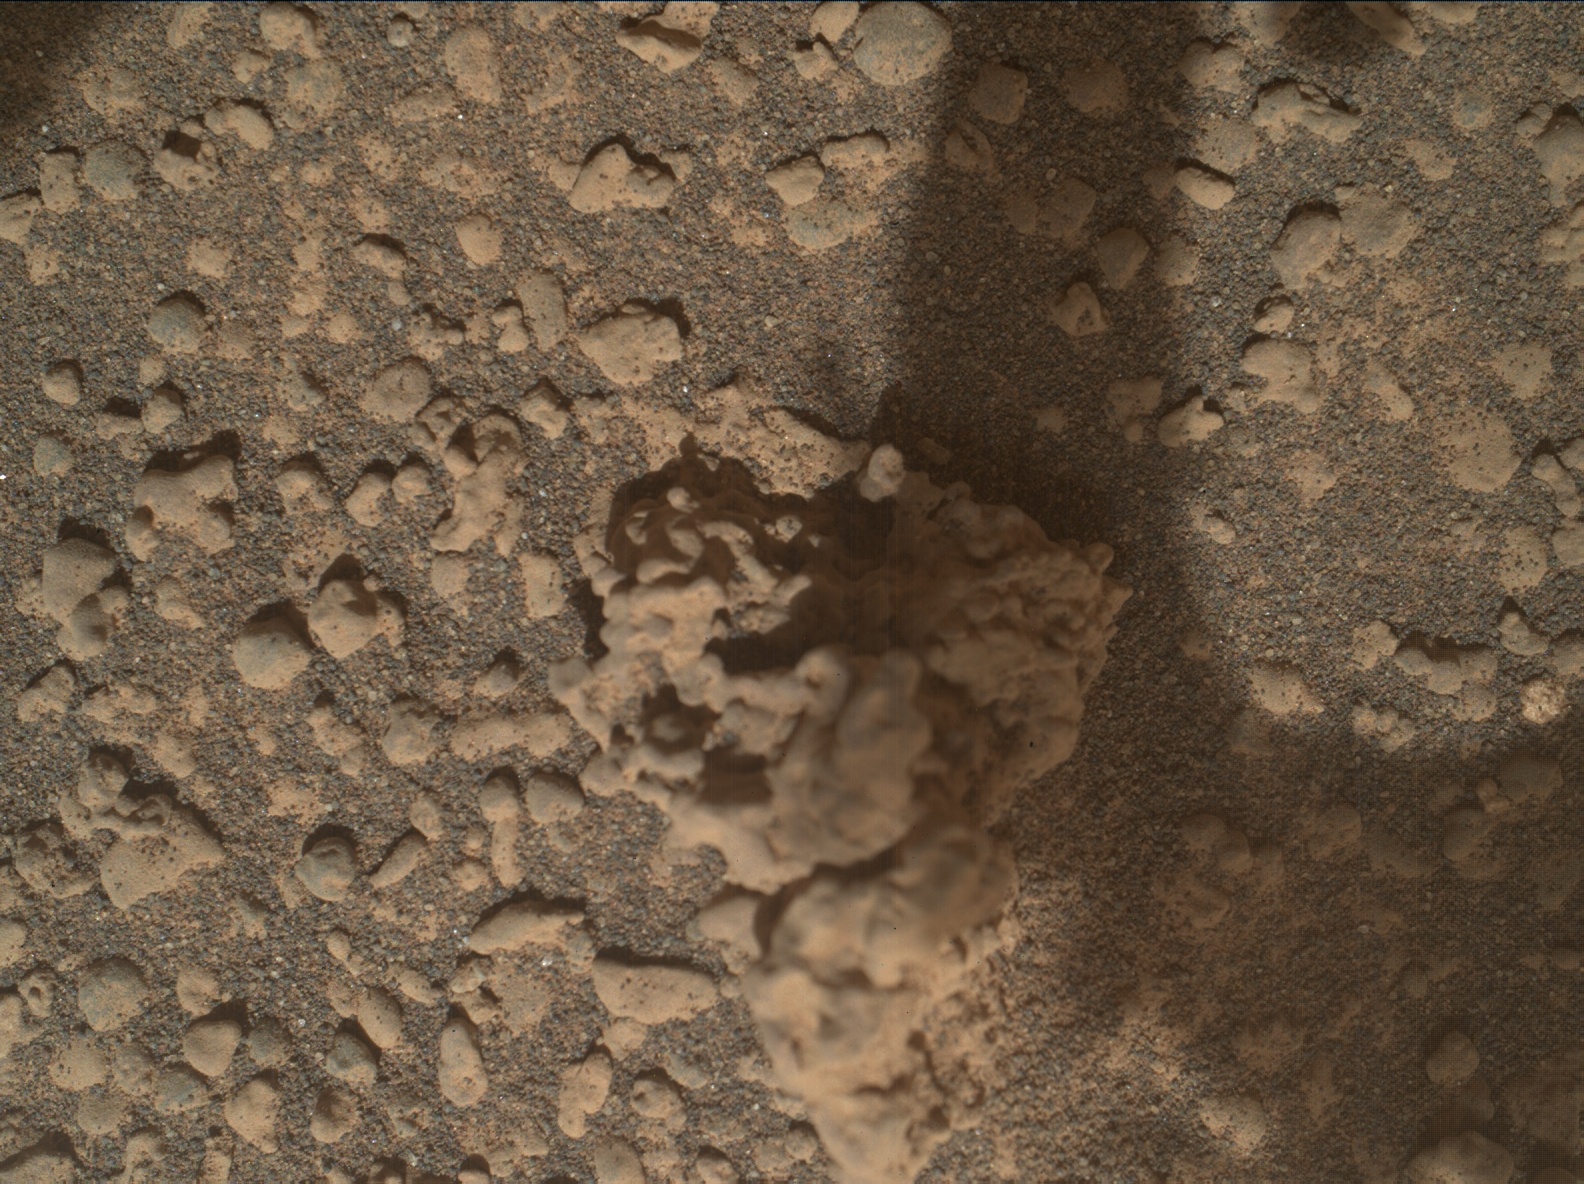 Nasa's Mars rover Curiosity acquired this image using its Mars Hand Lens Imager (MAHLI) on Sol 3564